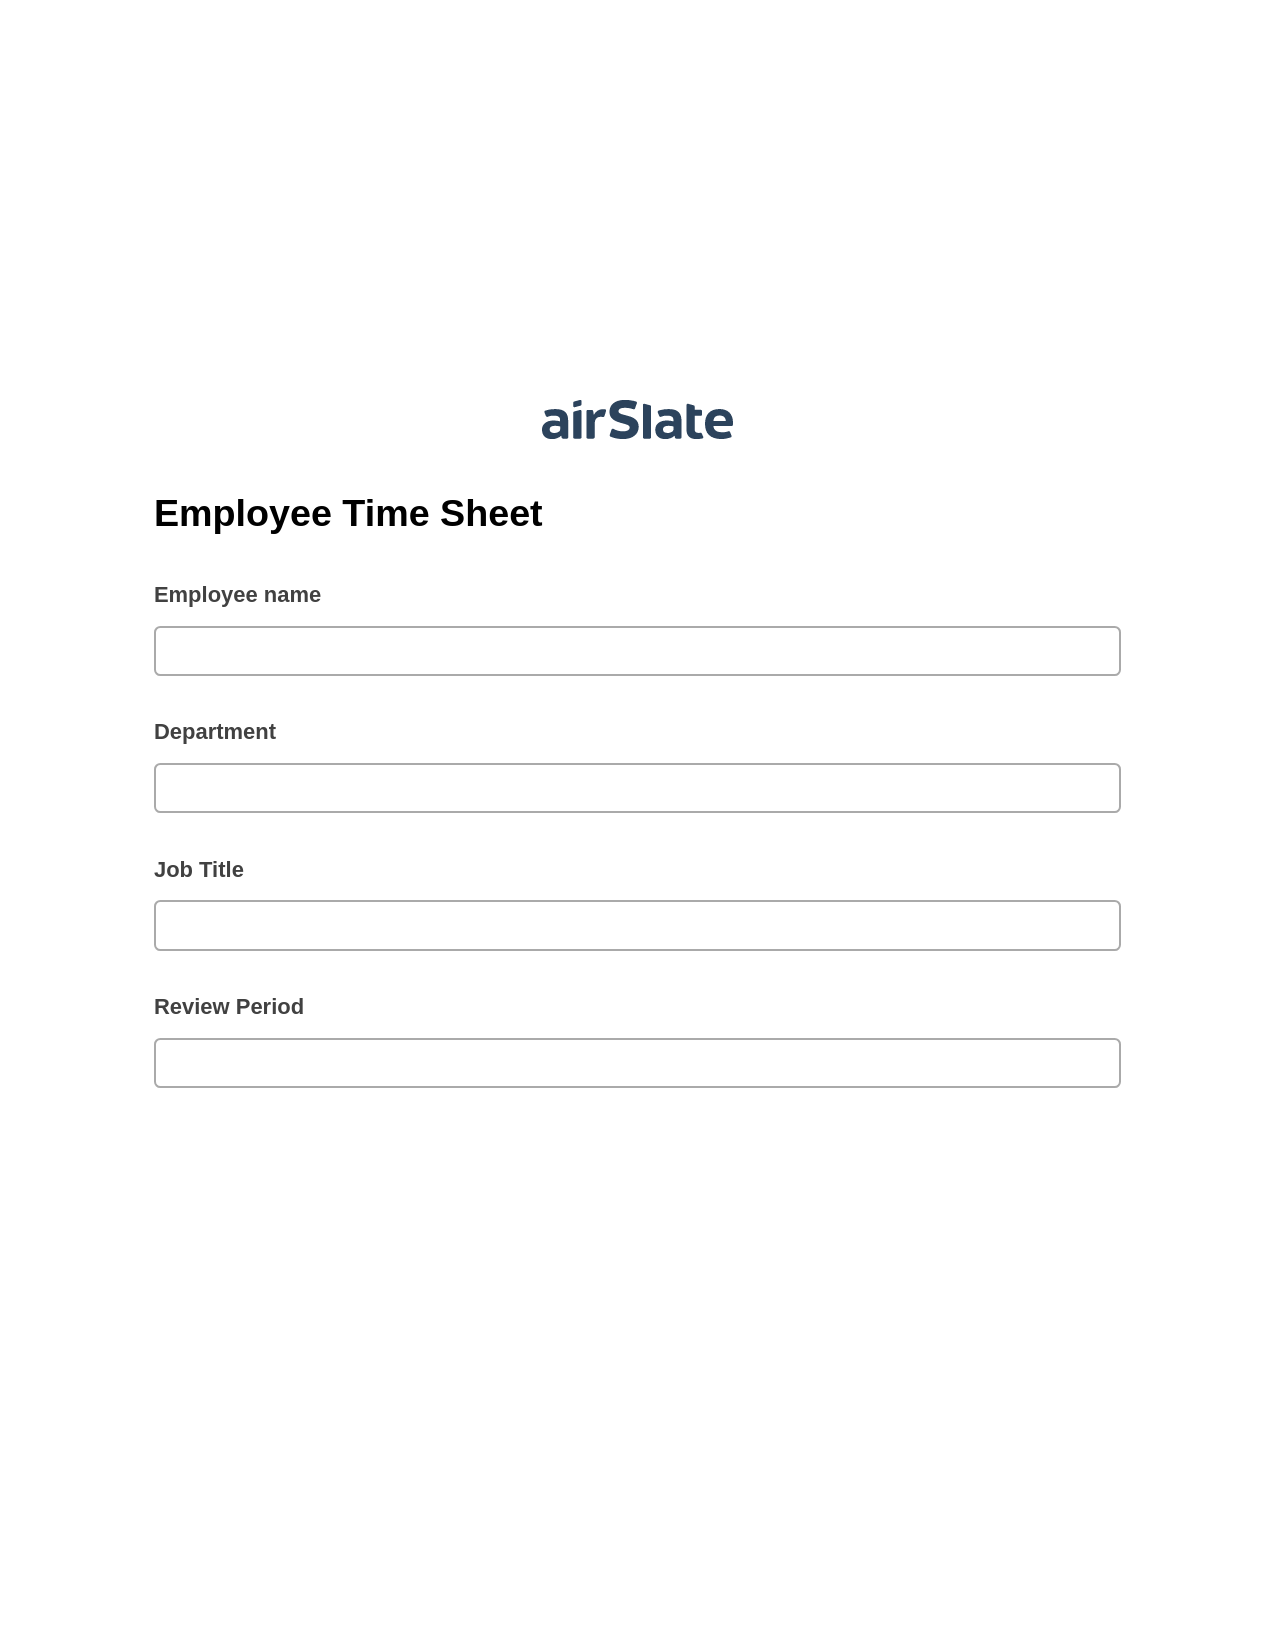 Employee Time Sheet Pre-fill from Excel Spreadsheet Bot, Create Slate Reminder Bot, Export to Excel 365 Bot